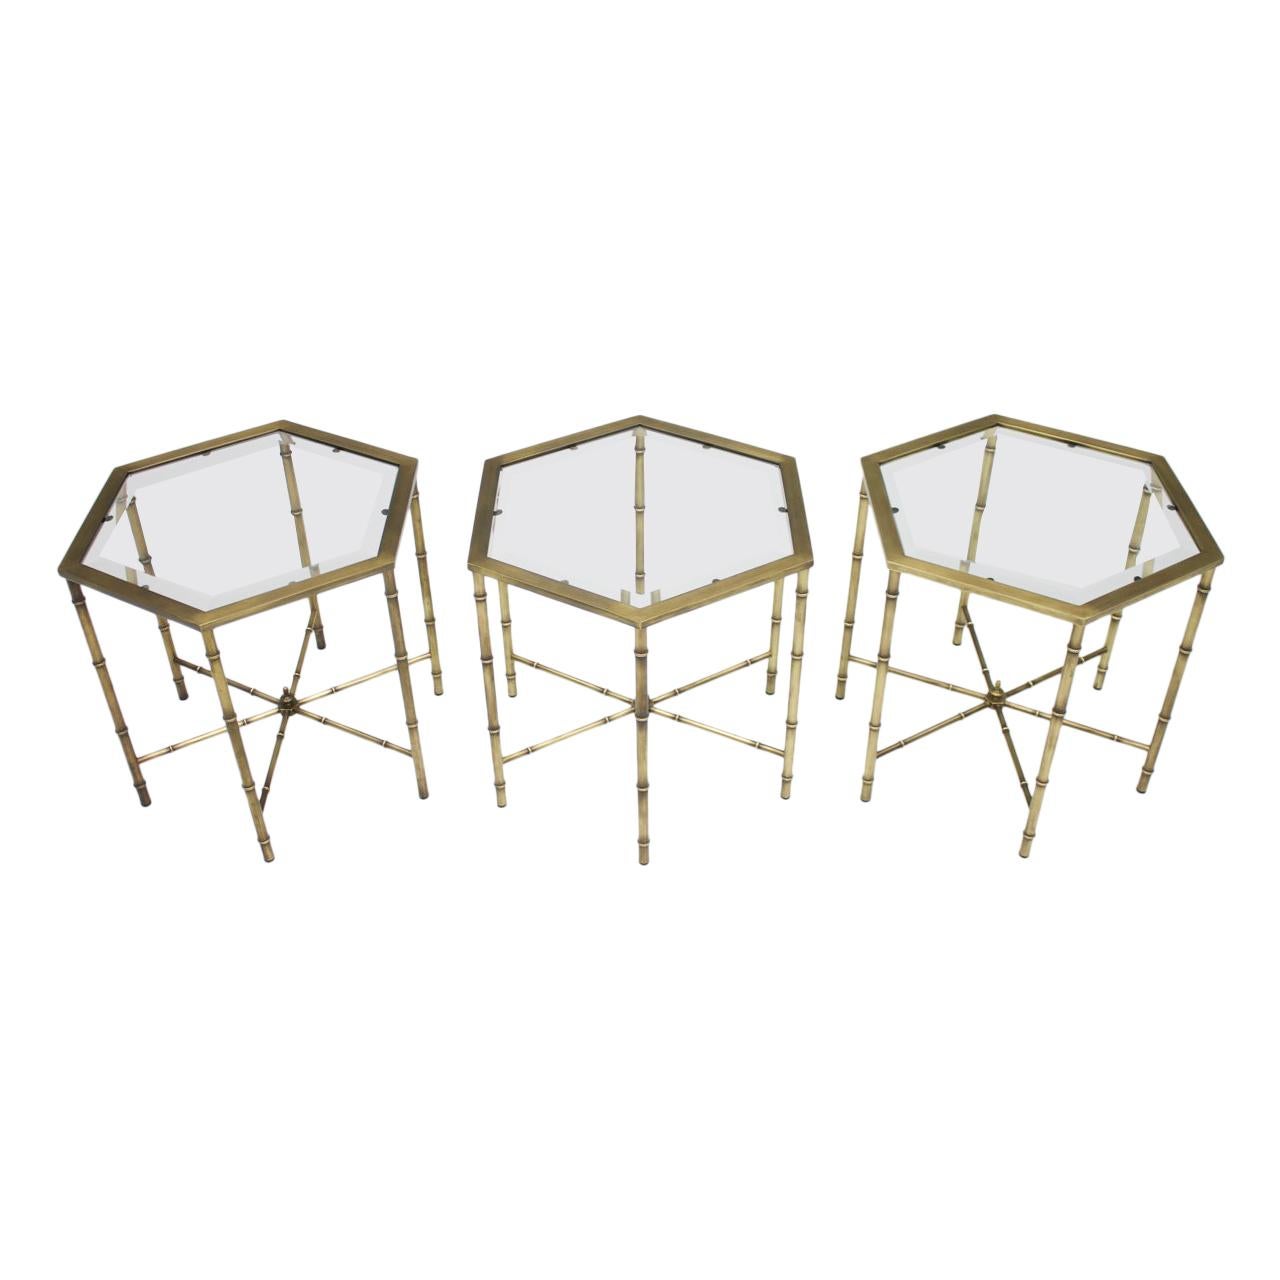 Set of Three Hexagonal Side Table in Brass and Glass, 1970s